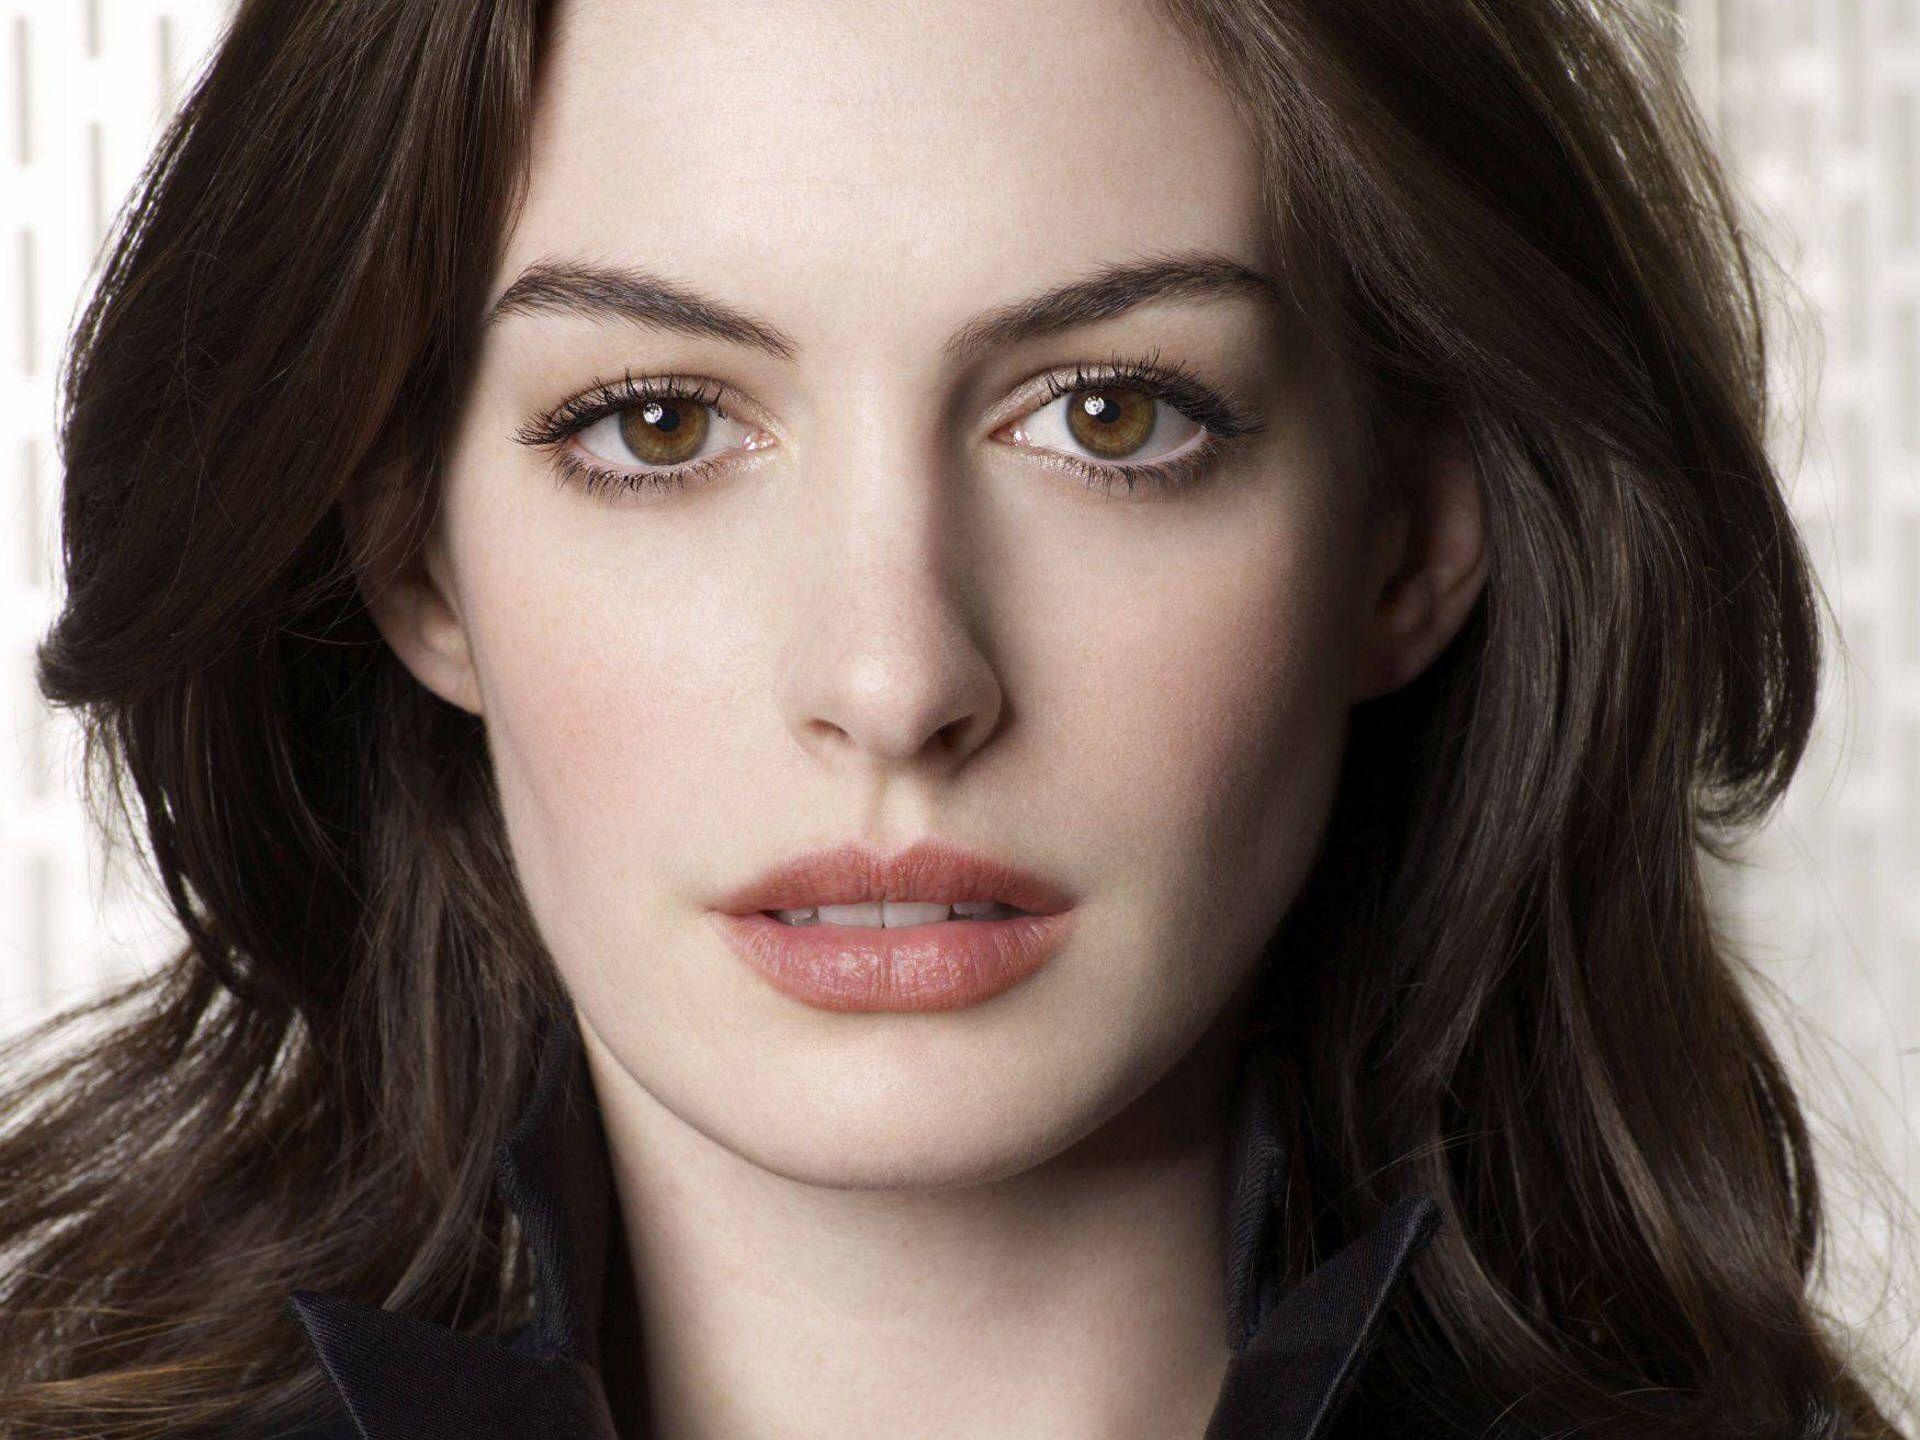 Anne Hathaway: Appeared as Liz Curran in a 2010 romantic comedy film, Valentine's Day. 1920x1440 HD Wallpaper.